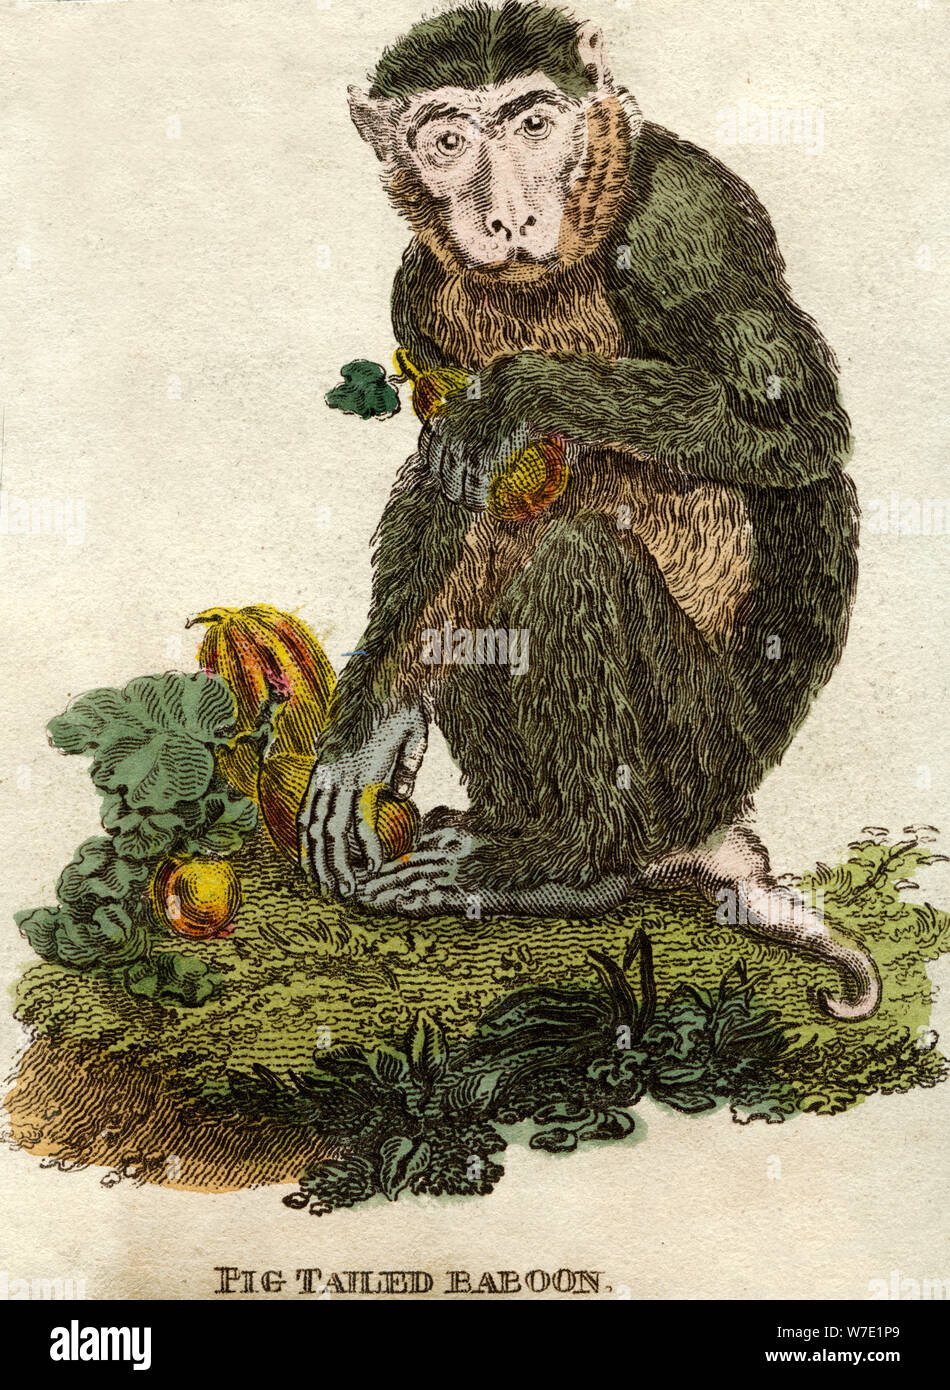 Pig tailed baboon. Artist: Unknown Stock Photo